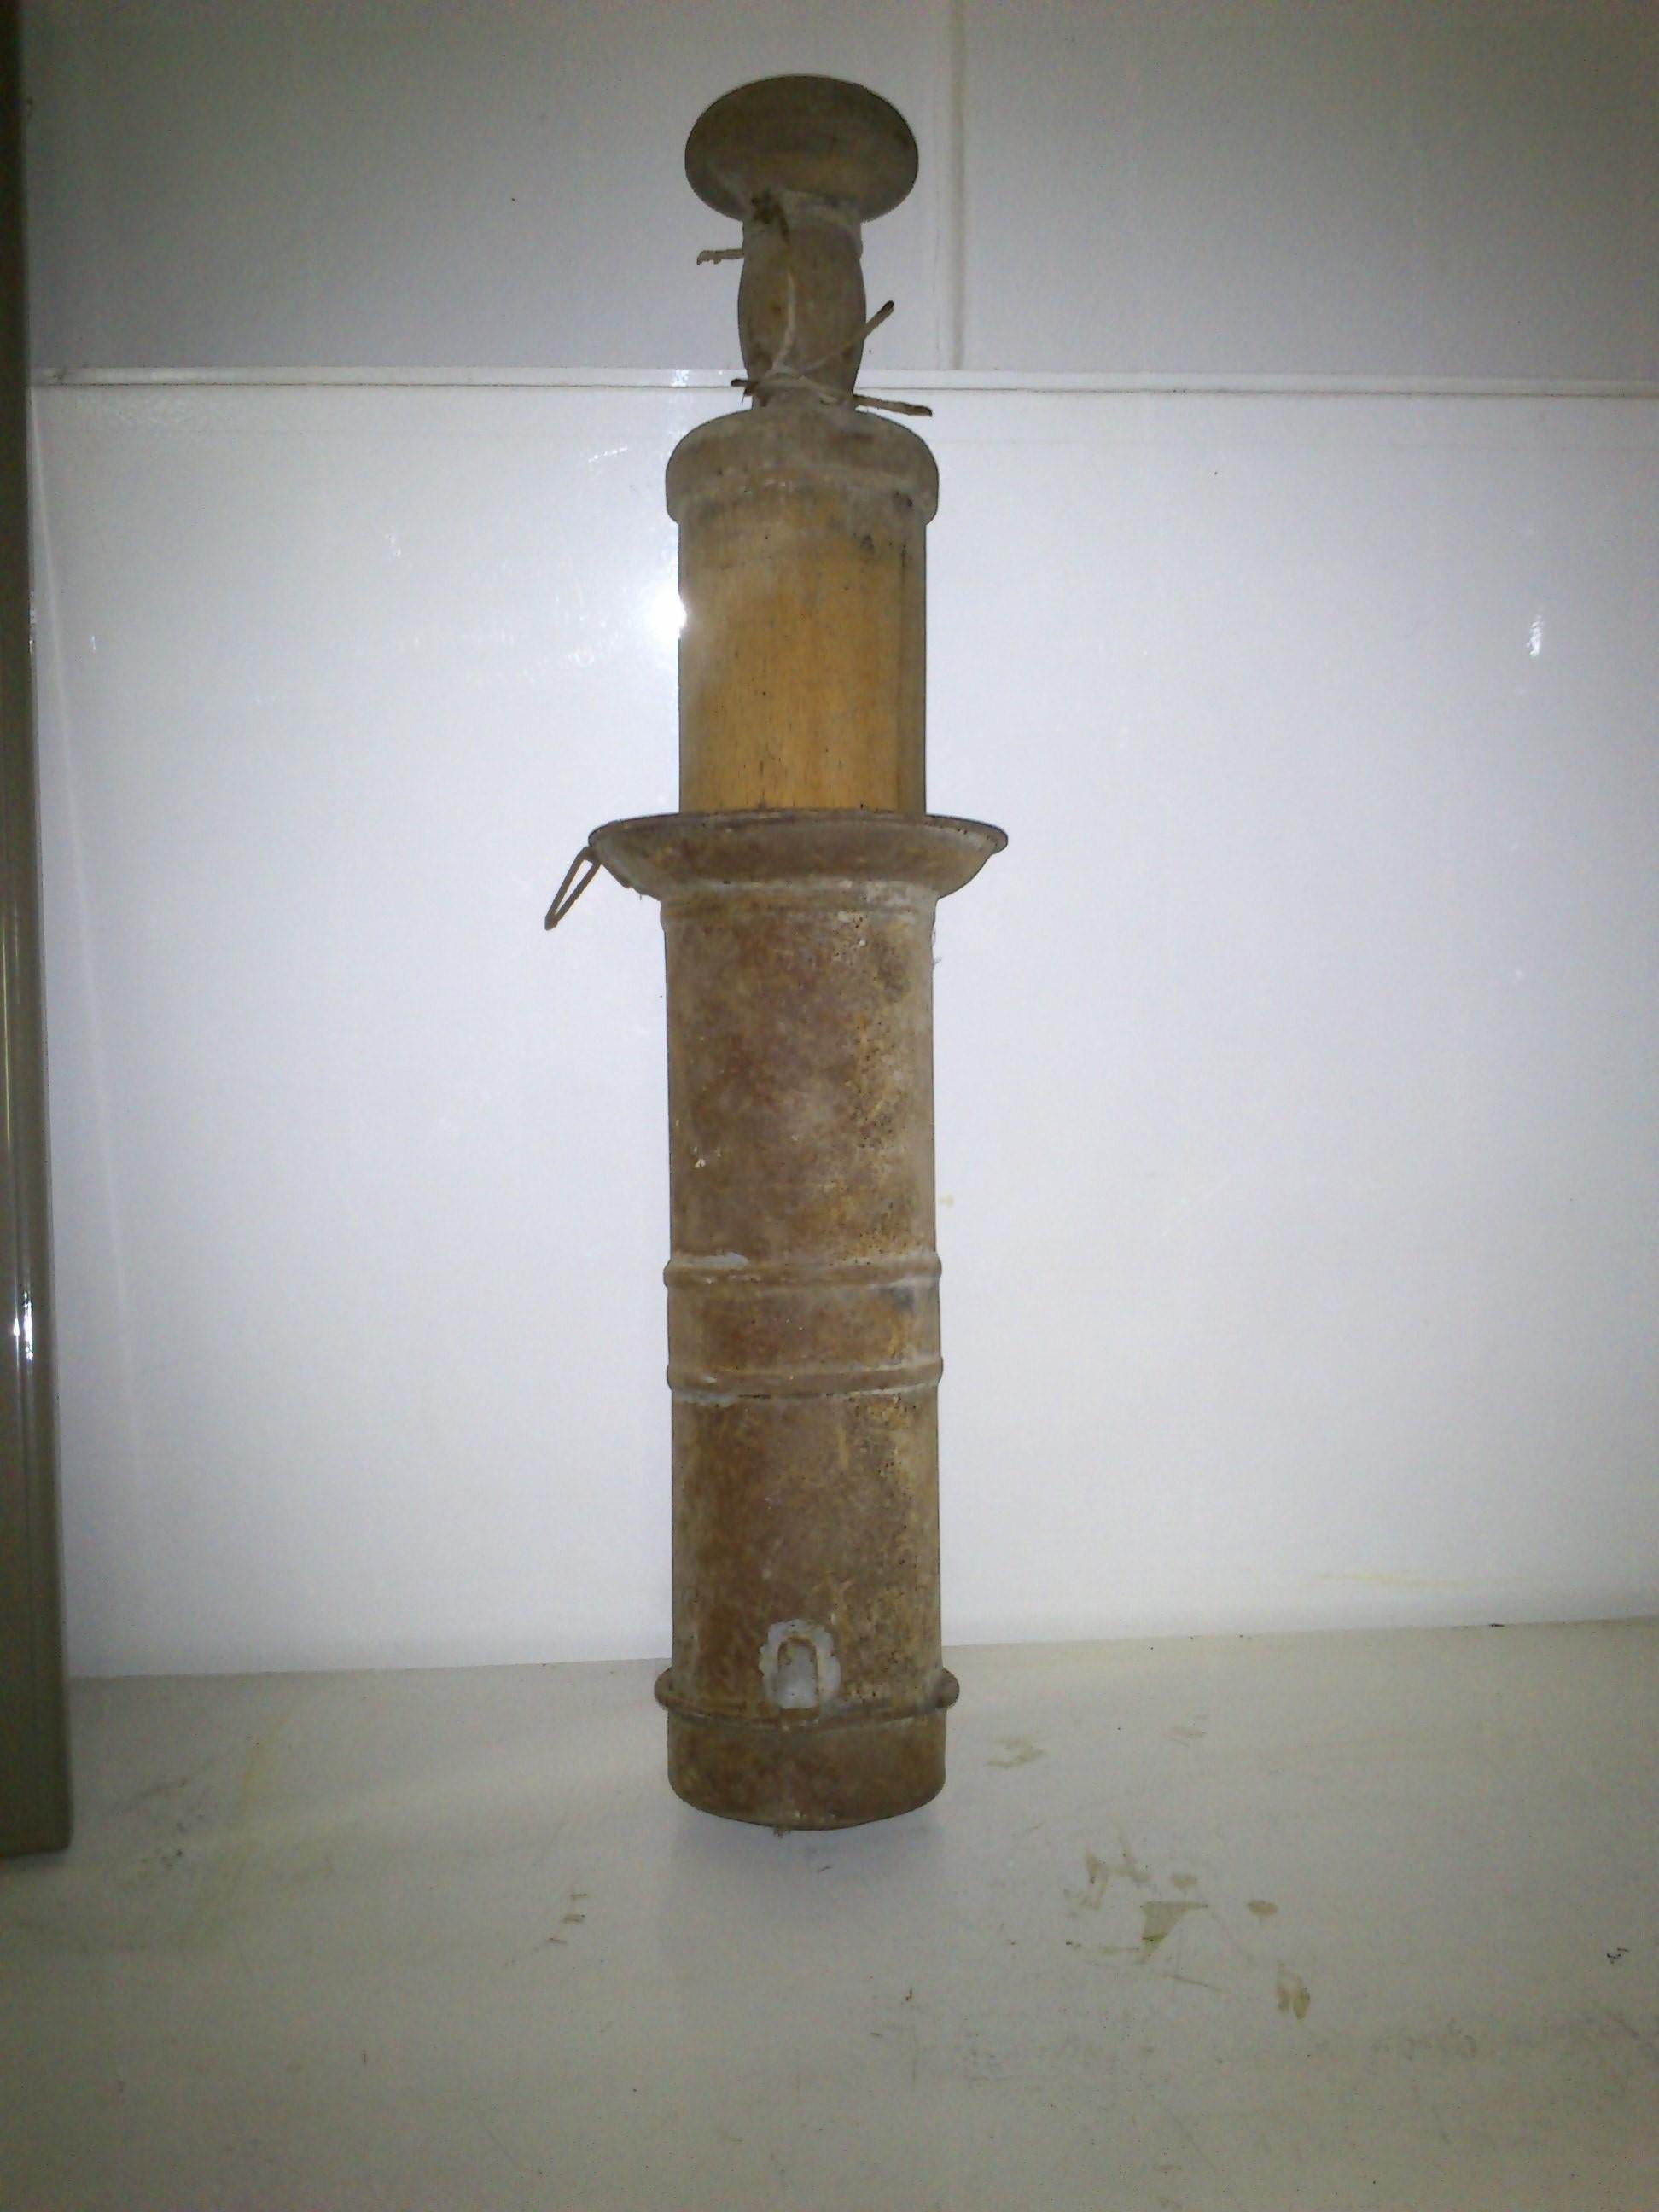 Antique Primitive Tin Tube Sausage Stuffer with Wooden Plunger
Wooden Plunger is in great condition and Tin Shaft is also in great condition.
ColorBrown
Materialswood ,Tin
ConditionGood, Wear consistent with age and use
Finishrust
Height20,47